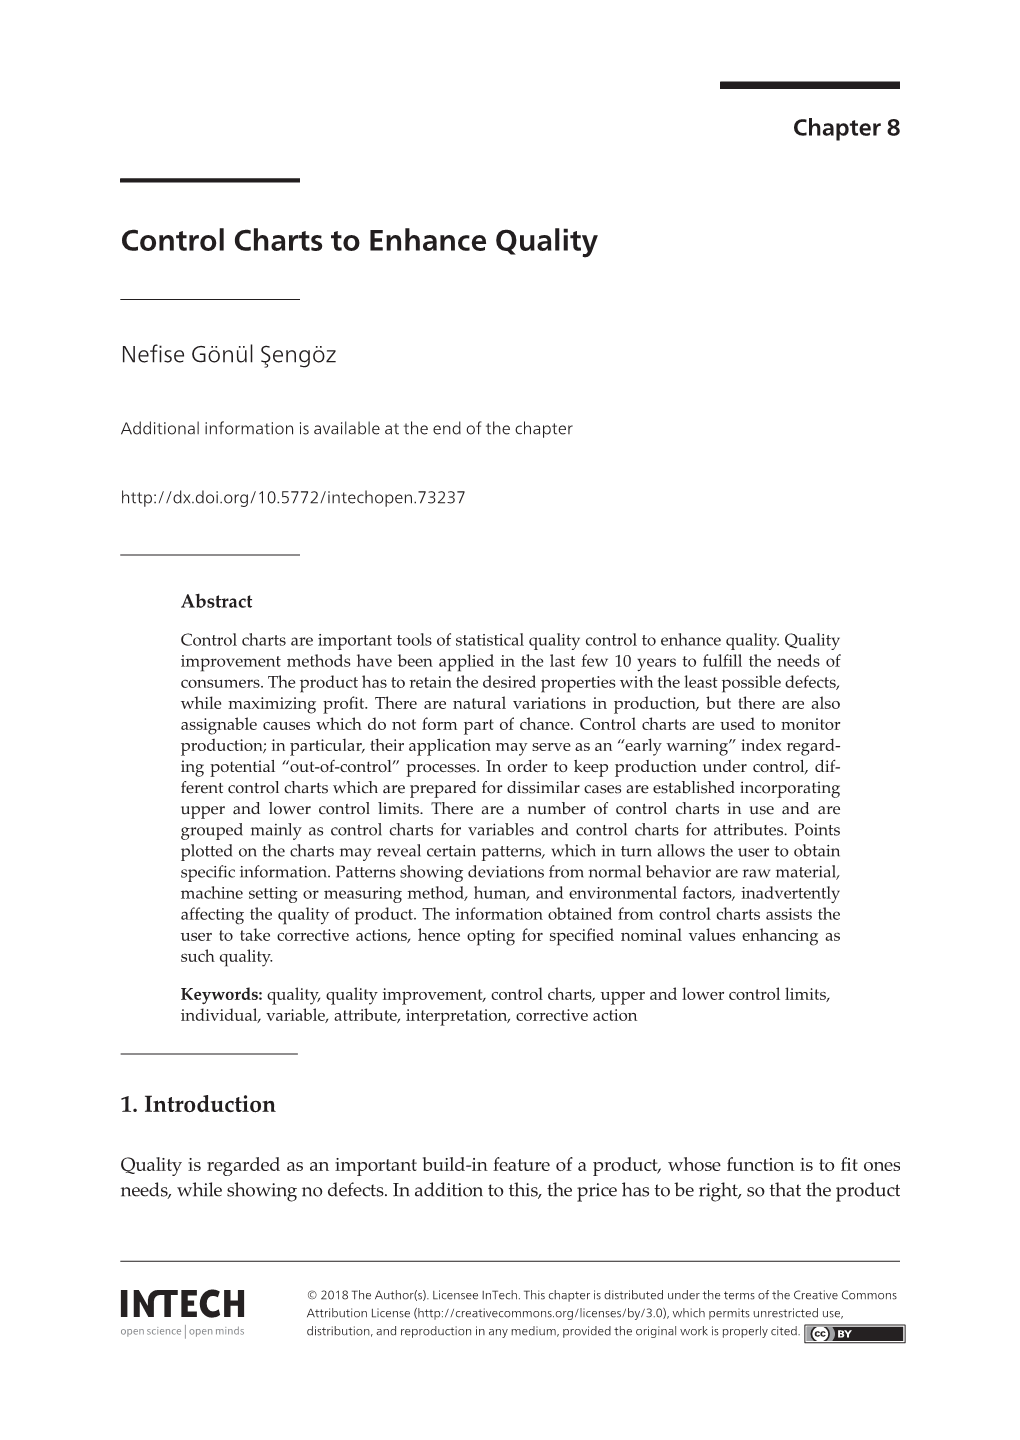 Control Charts to Enhance Quality Control Charts to Enhance Quality